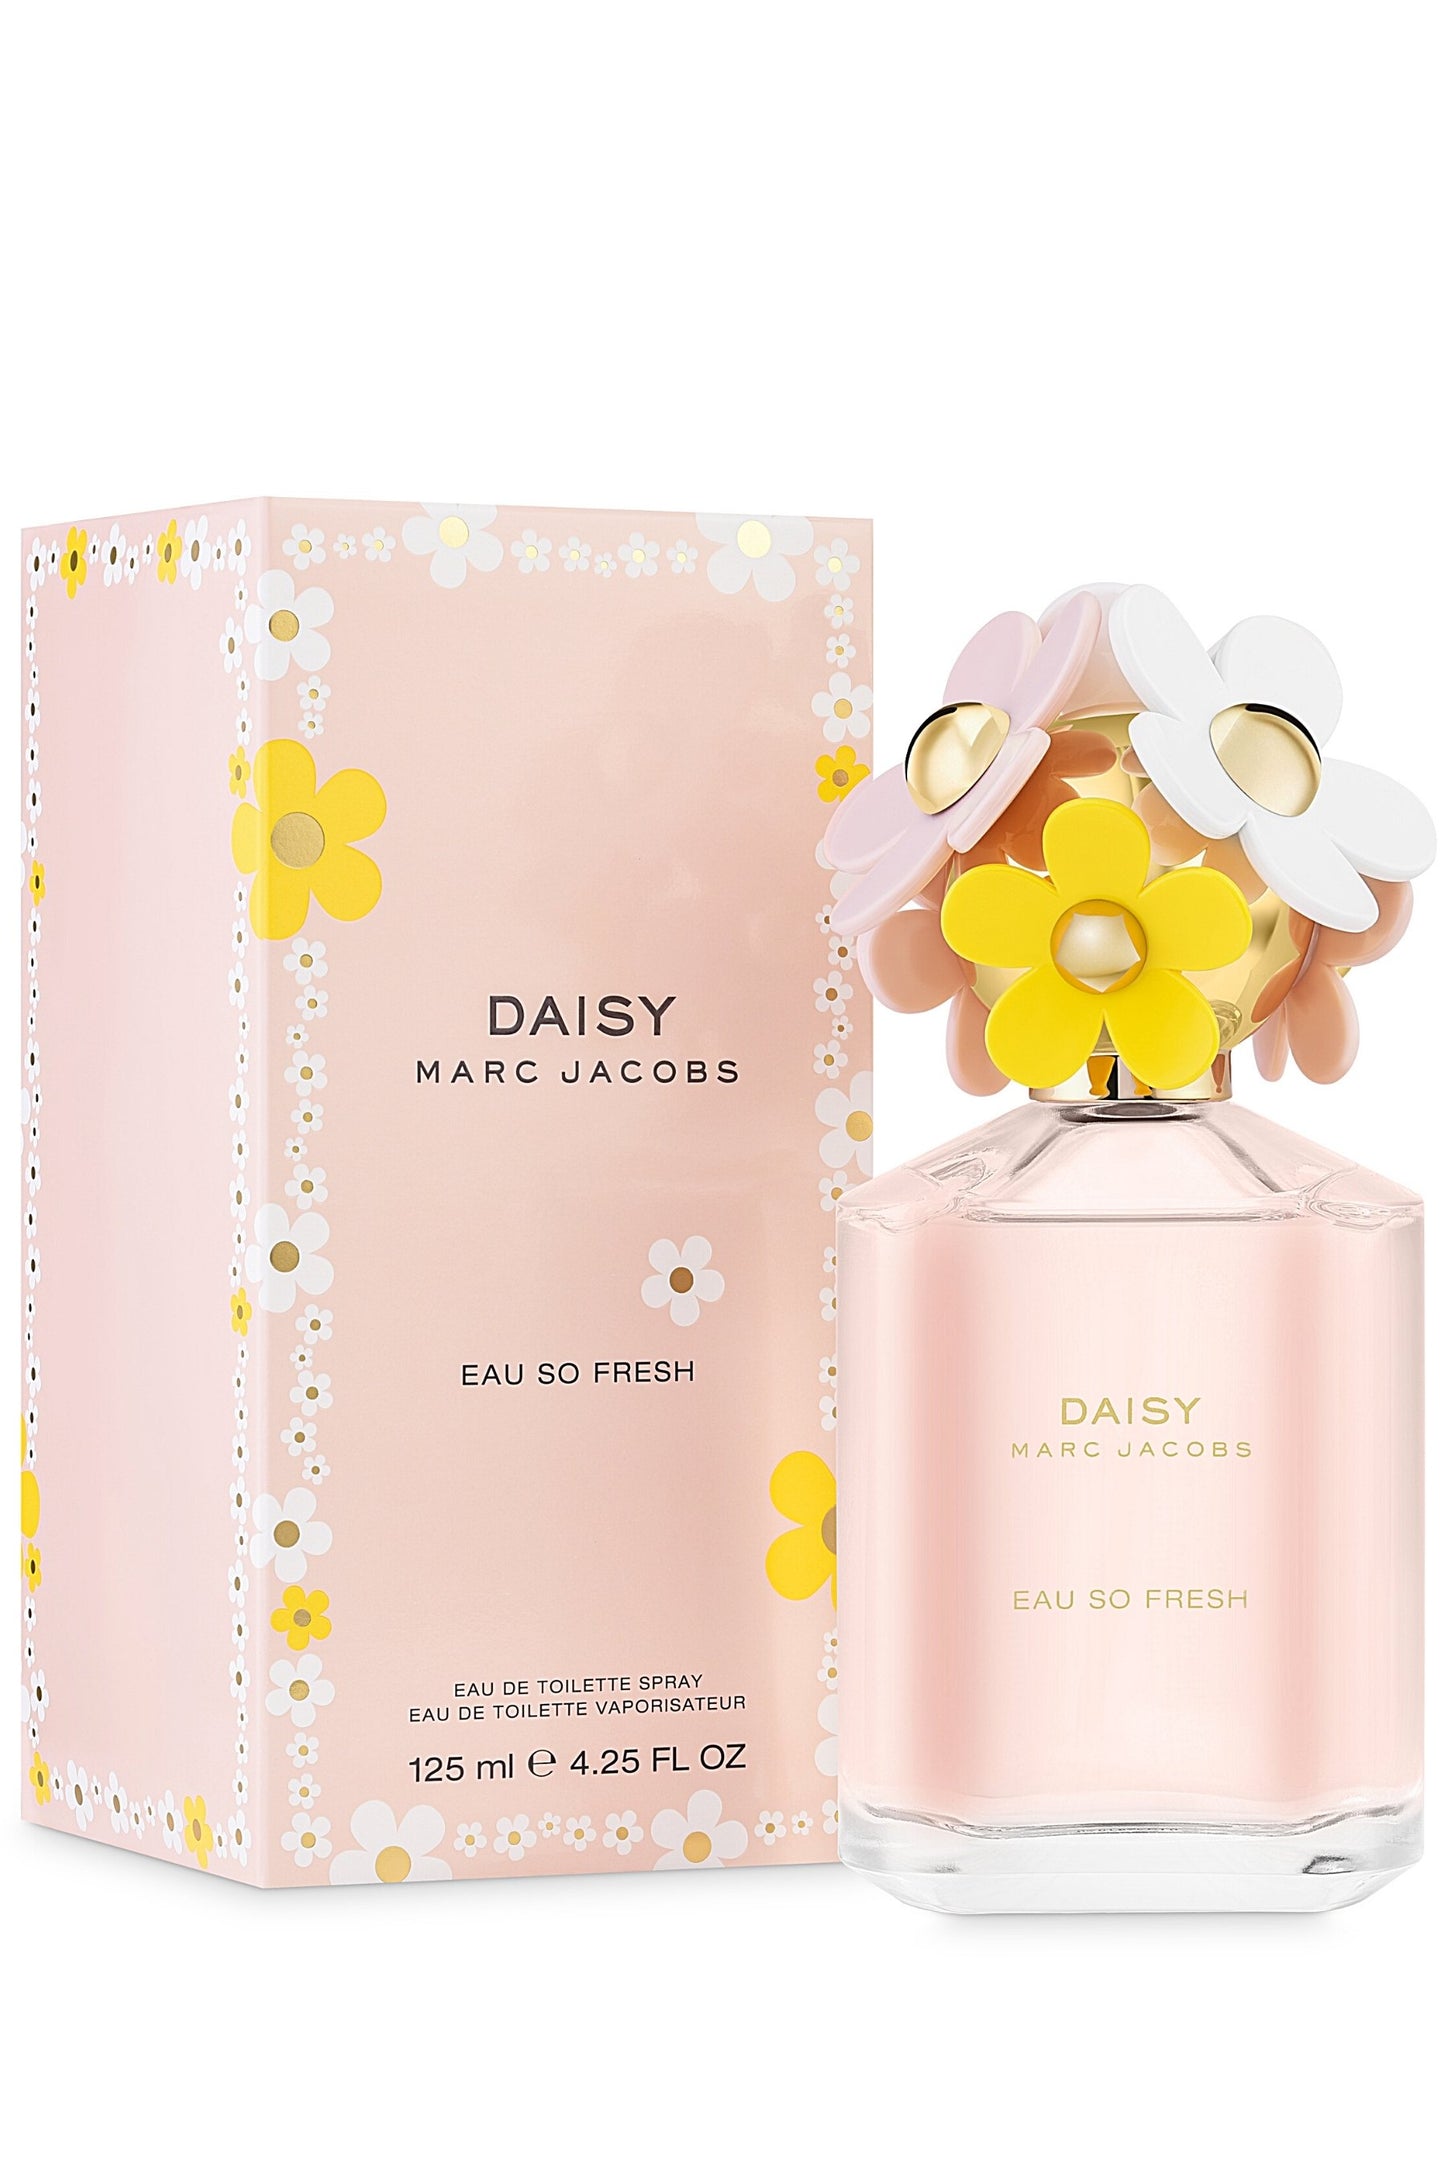 Daisy Eau So Fresh By Marc Jacobs - Scent In The City - Perfume & Cologne